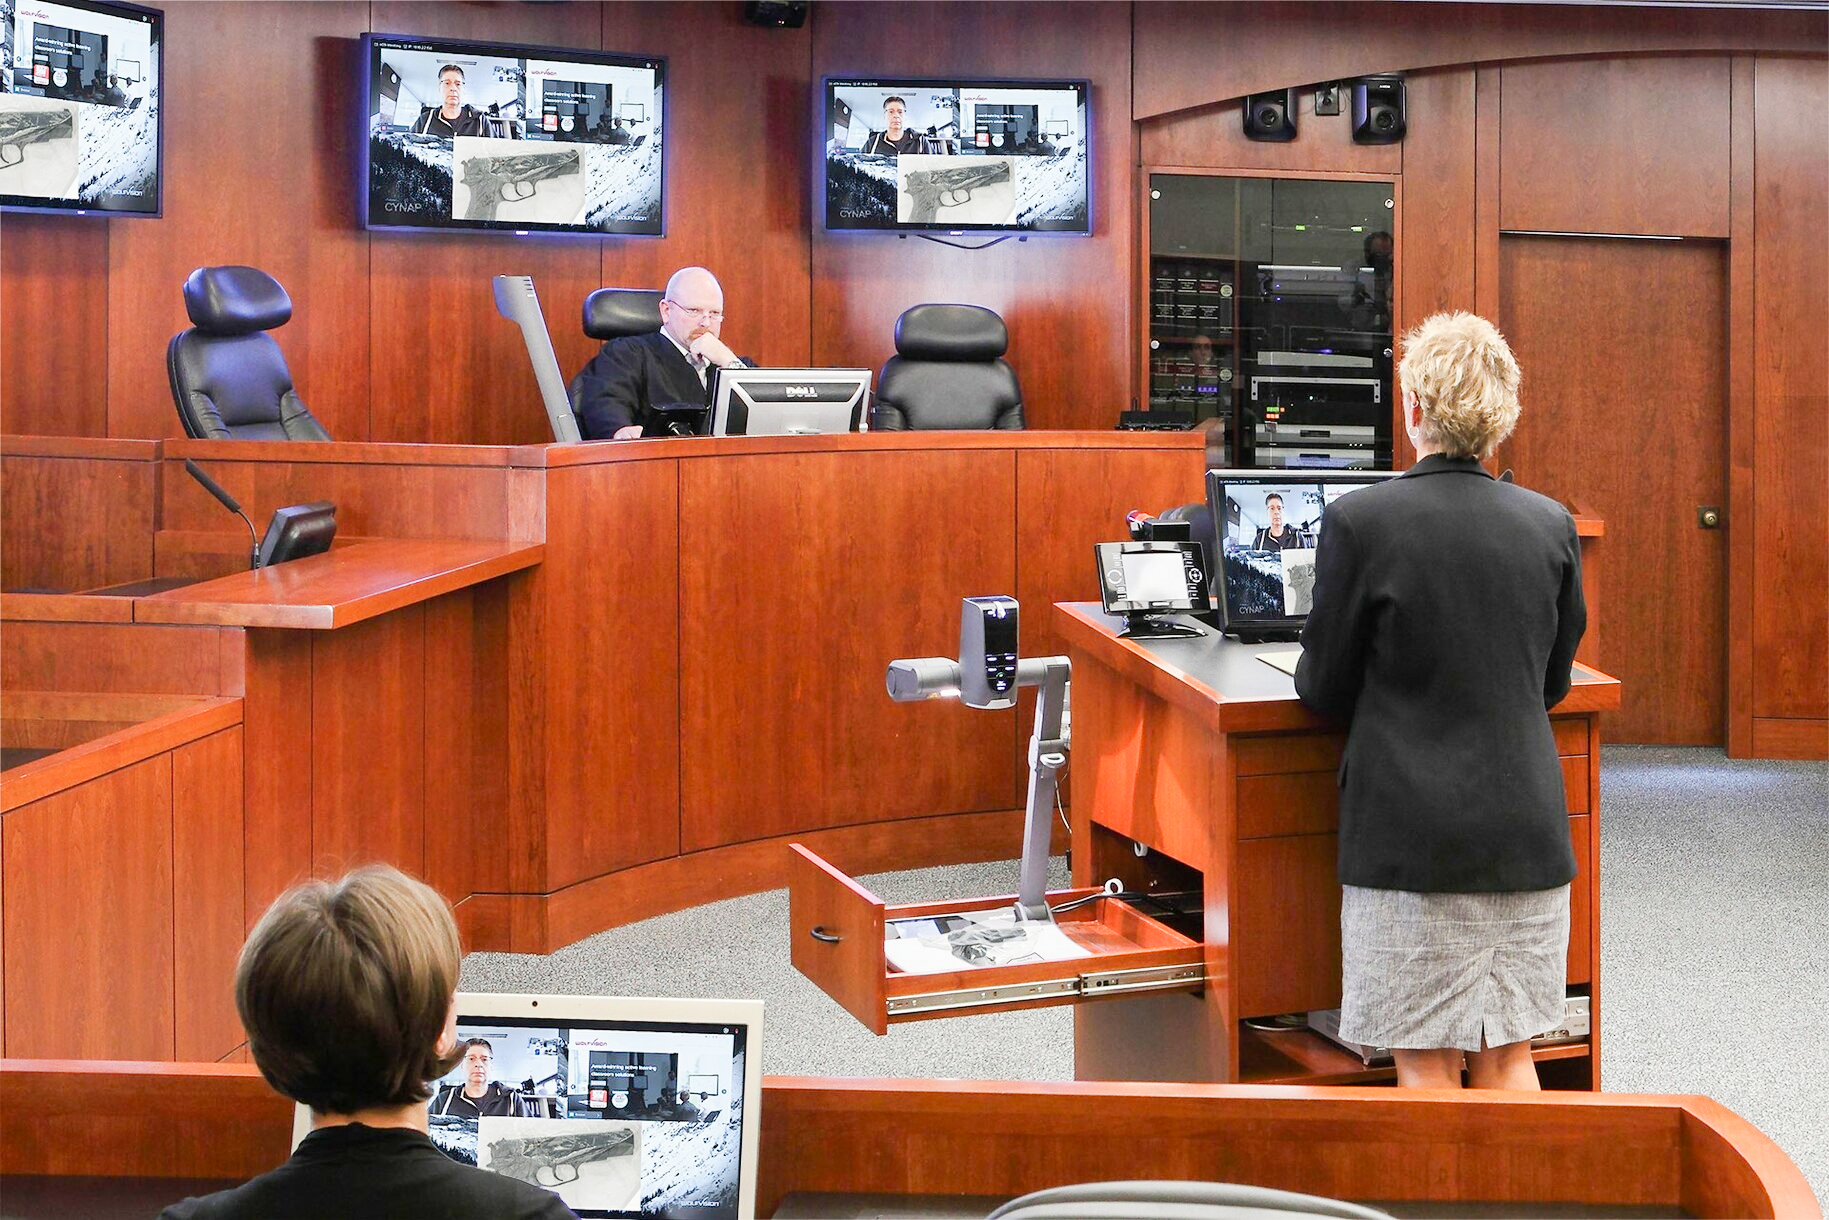 A courtroom with high resolution displays and projectors for evidence